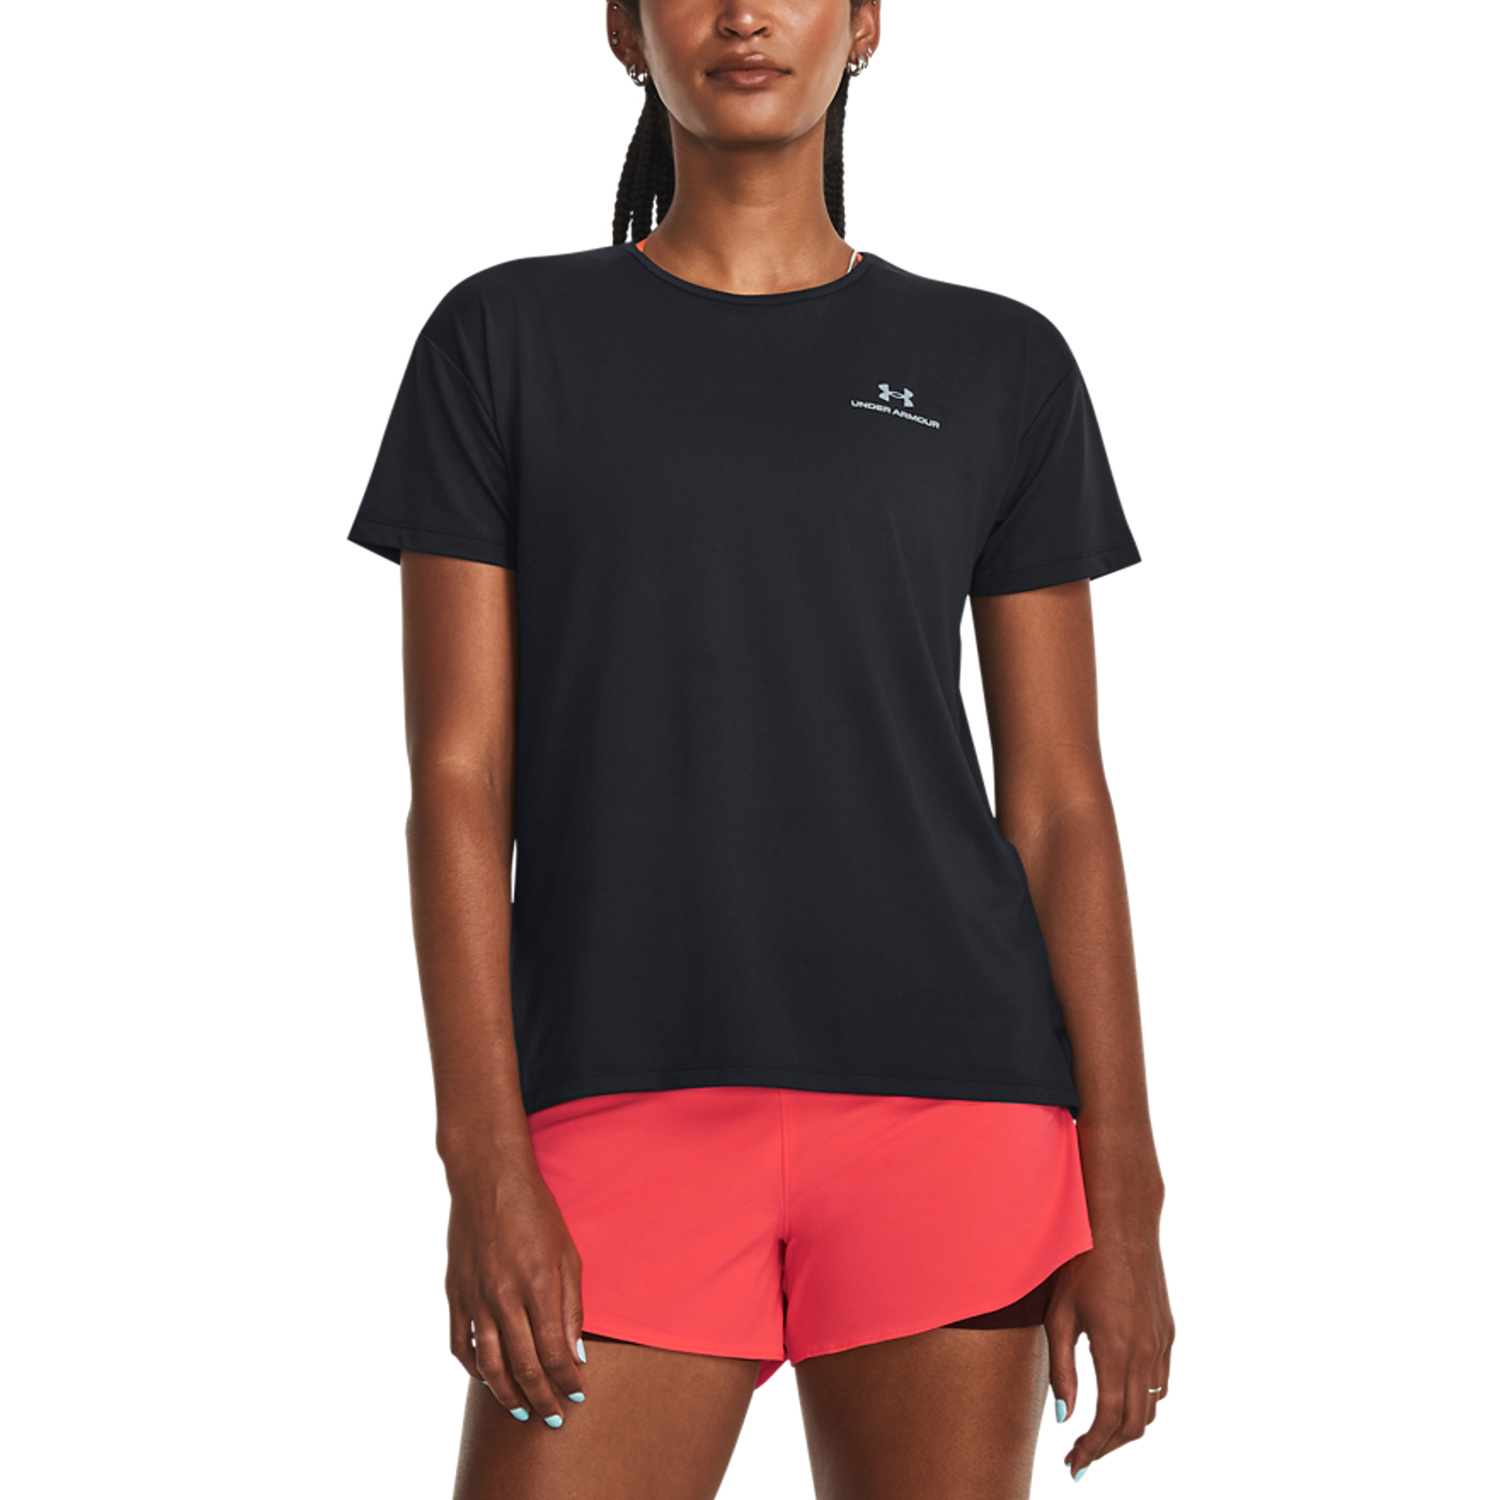 Under Armour Rush Energy 2.0 T-Shirt - Black/Pitch Gray